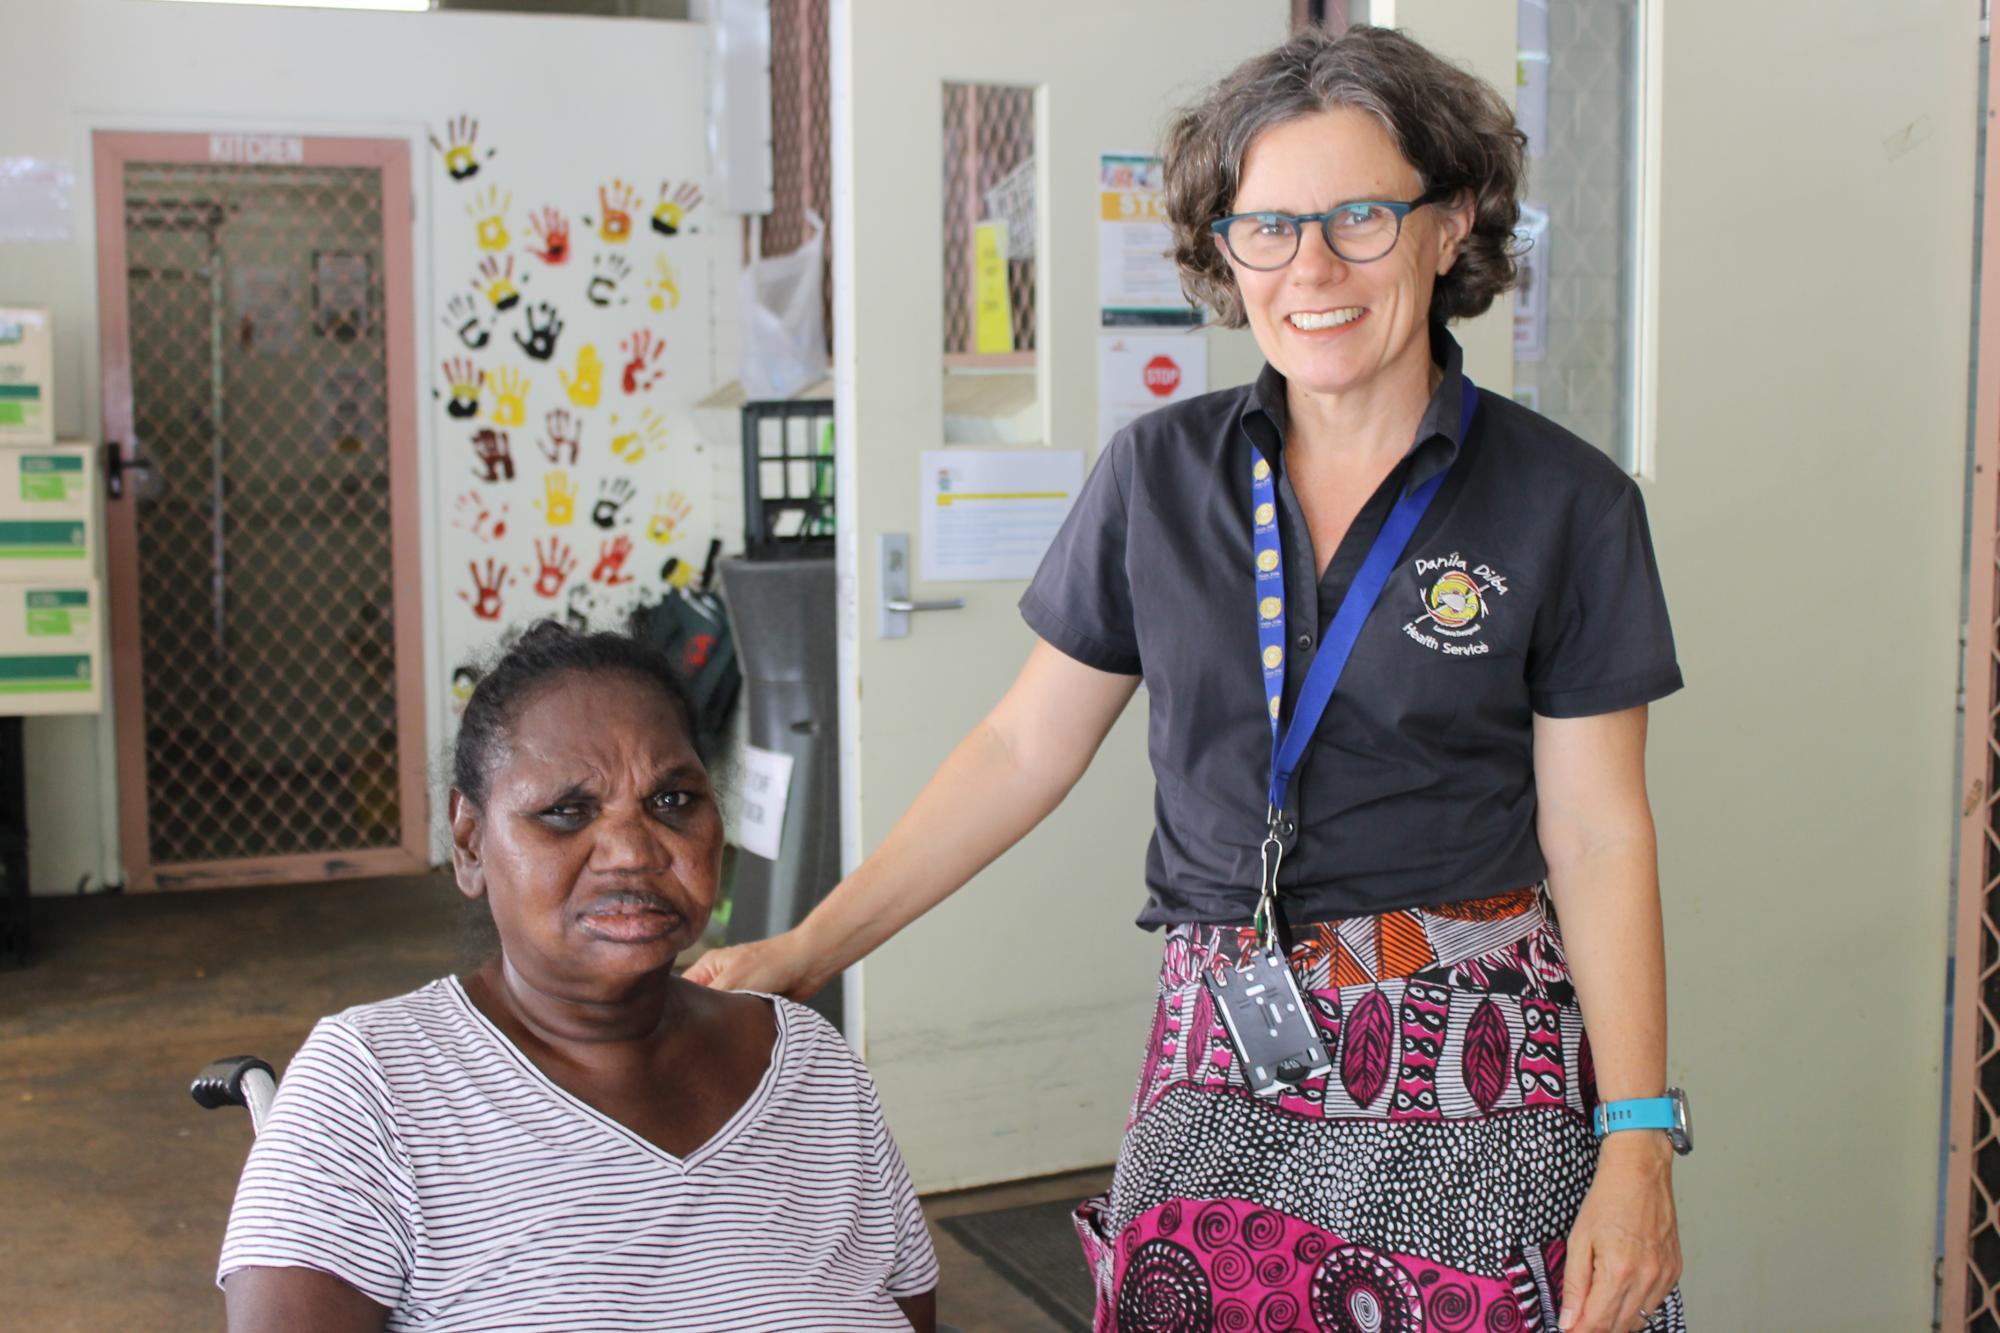 DDHS client meets with GP Emma Fitzsimmons at Rapid Creek Clinic. Emma has her hand on the client's wheelchair. Both people are smiling for the photo. 